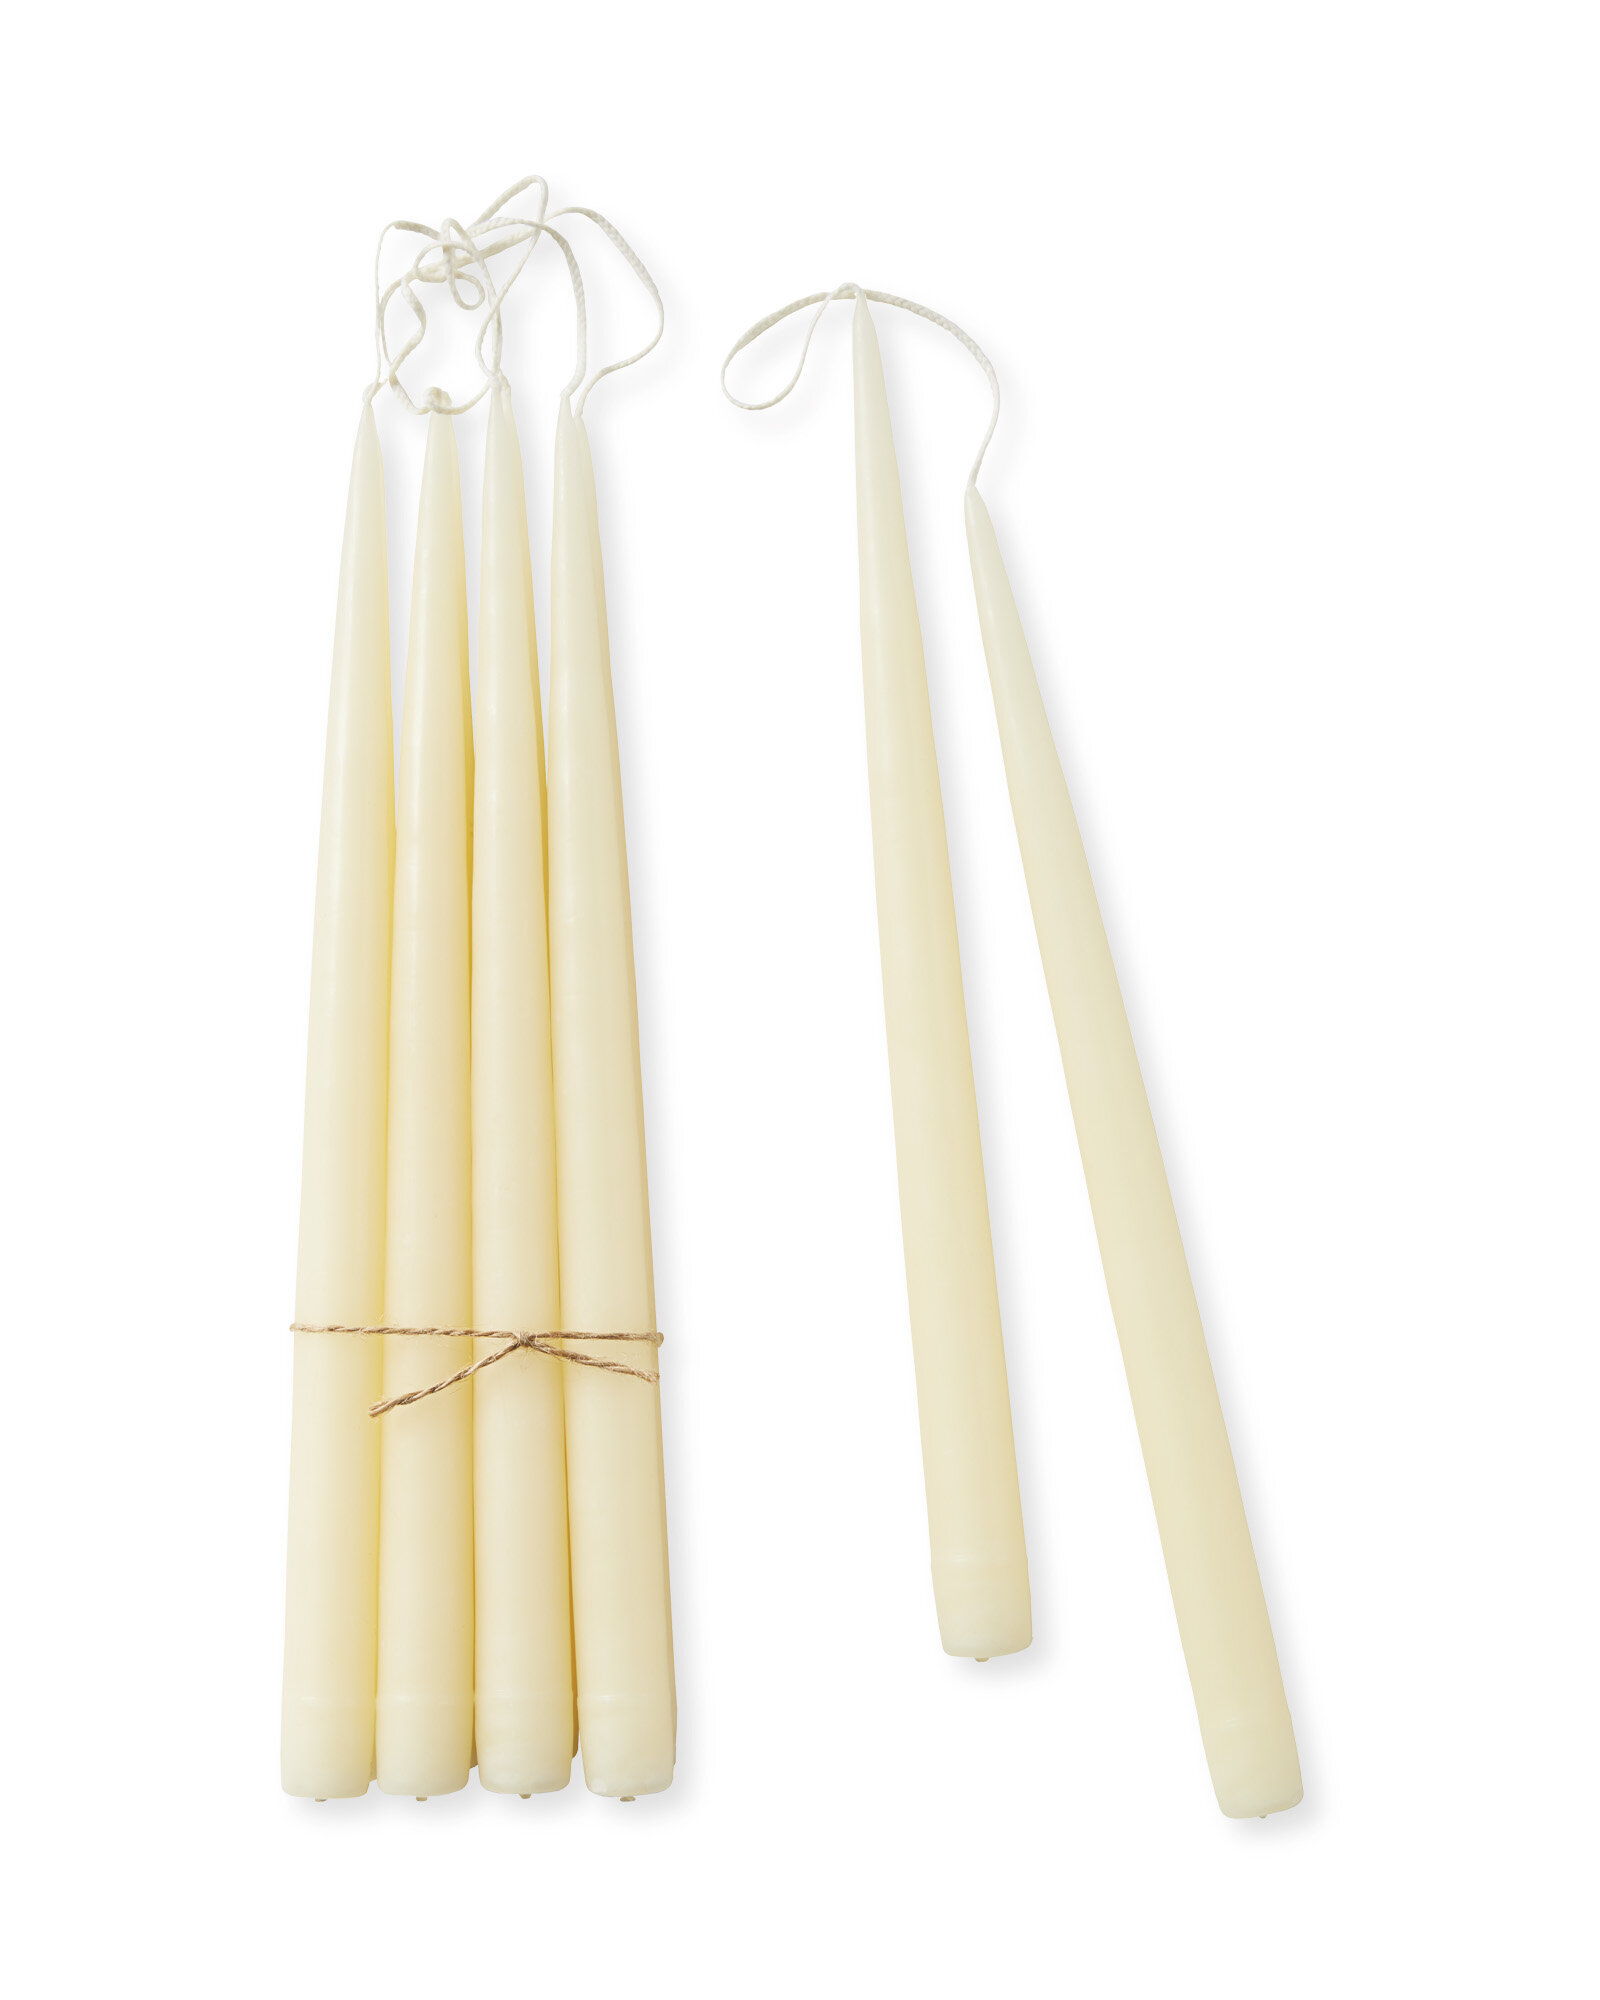 Serena and Lily Tapered Candles, Ivory Set of 10